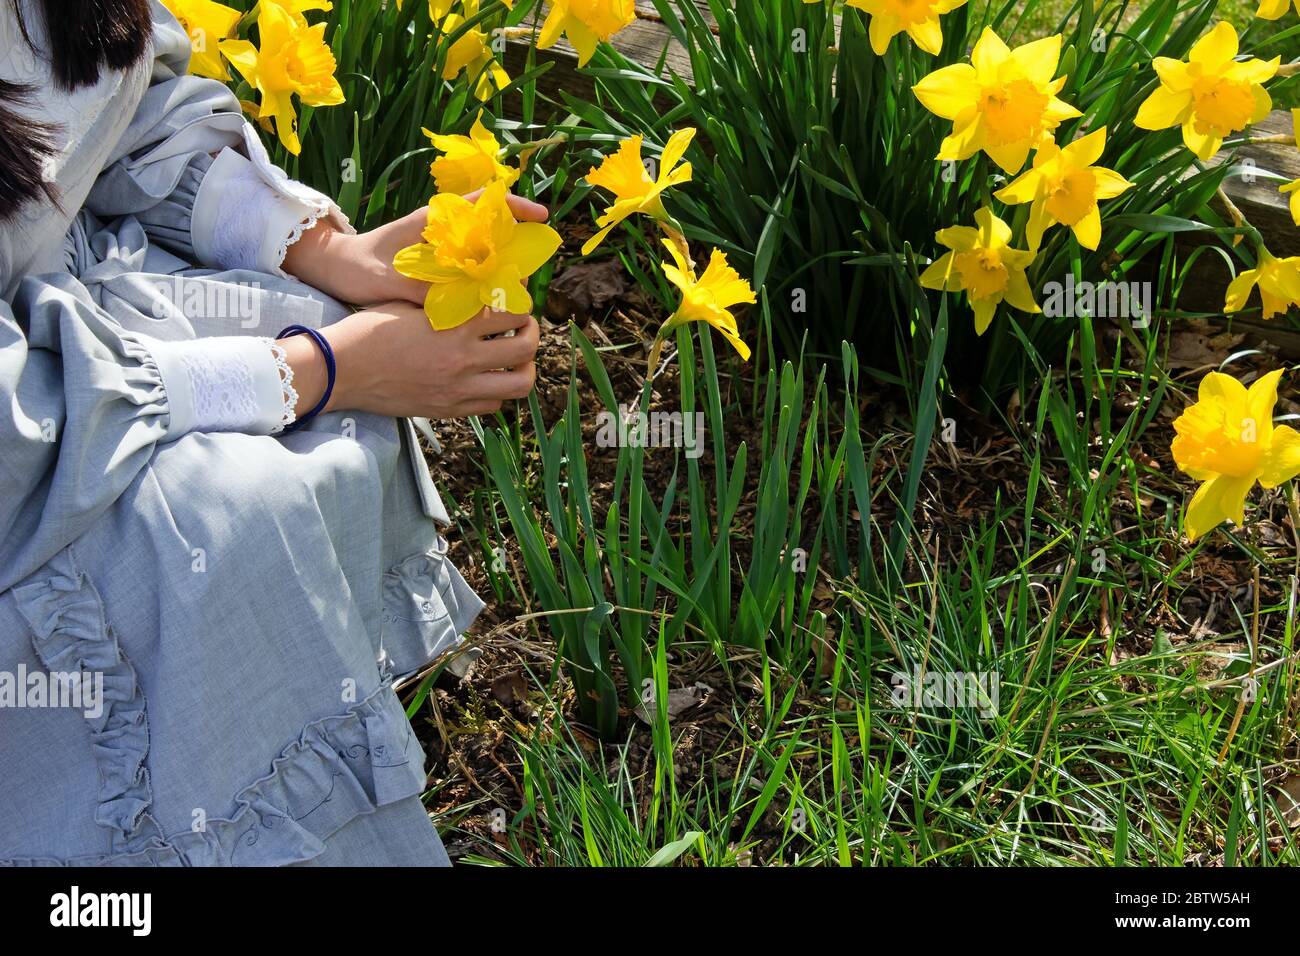 Young woman kneeling in daffodil garden Stock Photo